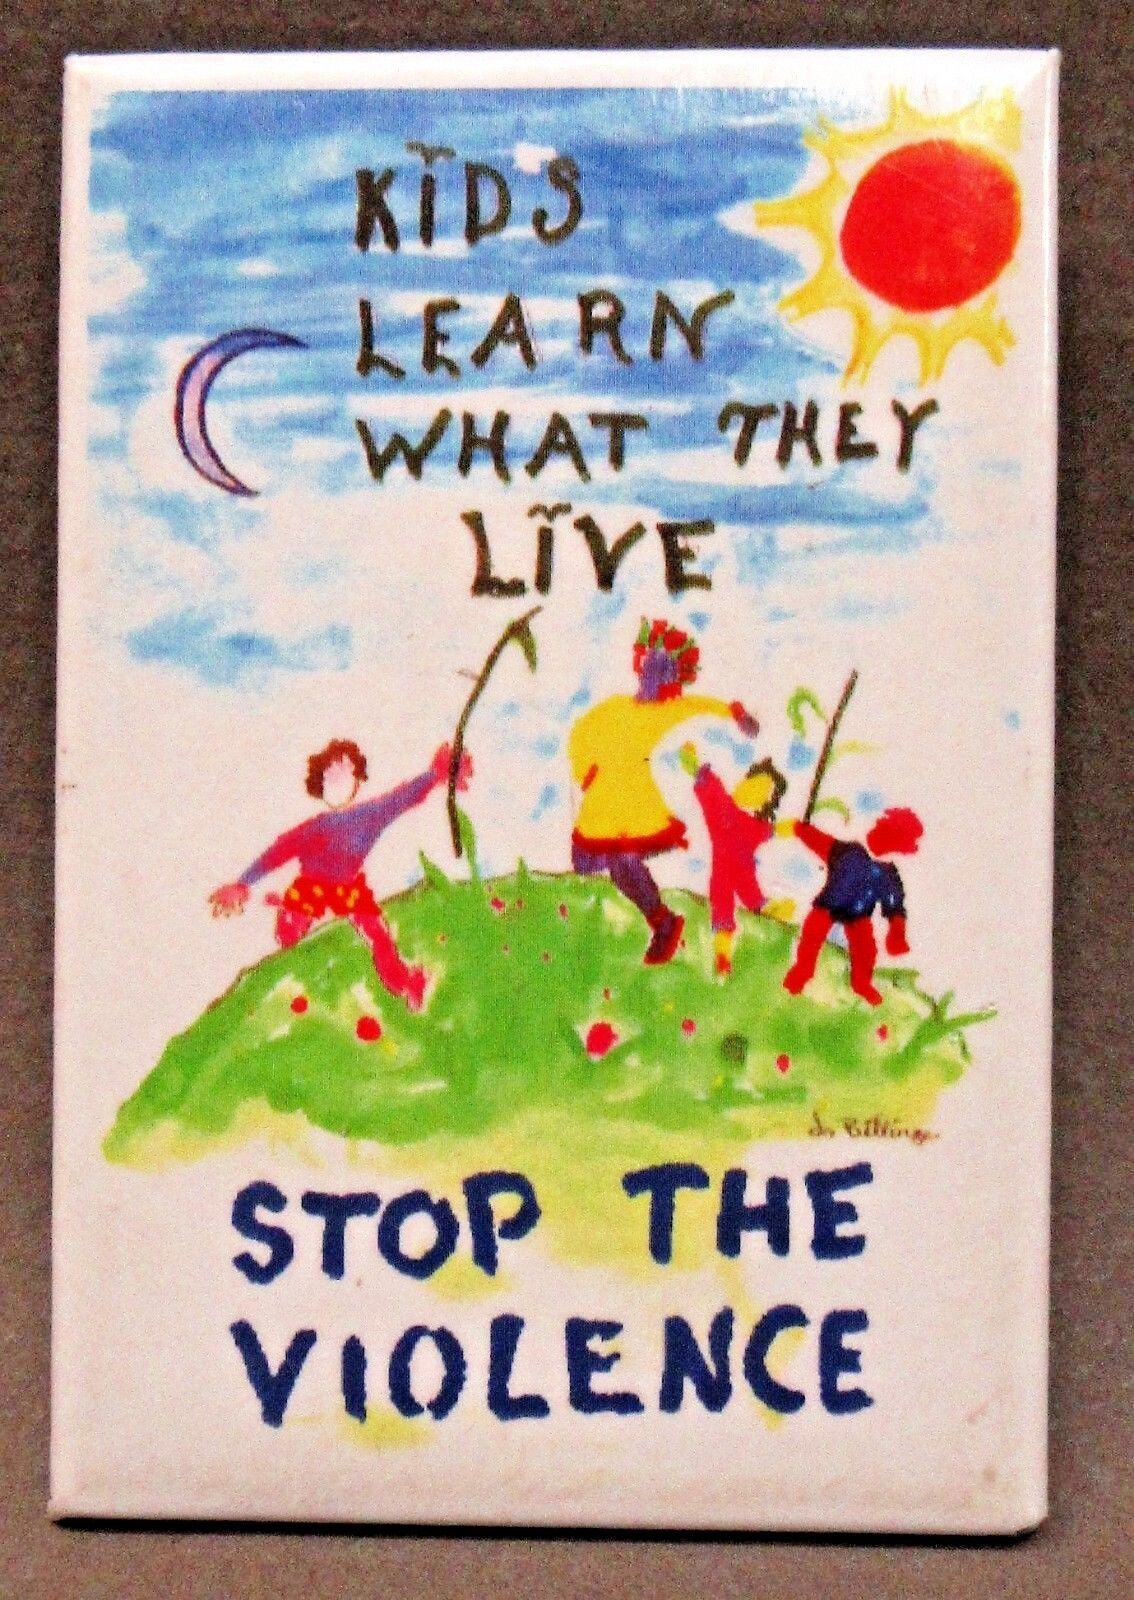 KIDS LEARN WHAT THEY LIVE - STOP THE VIOLENCE activist cause pinback button ^